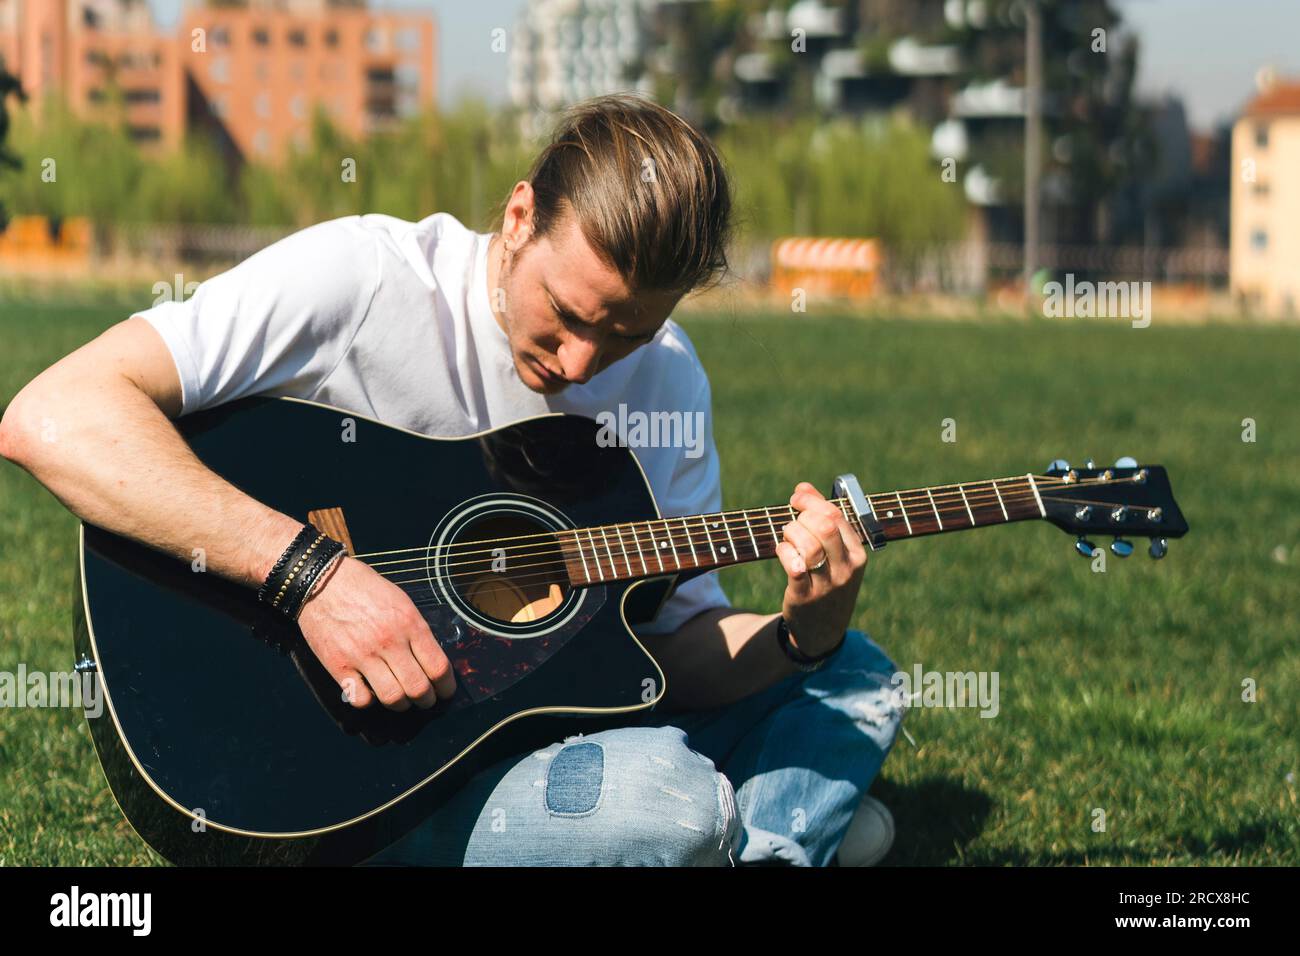 Young singer play the guitar in a garden during a sunny day Stock Photo